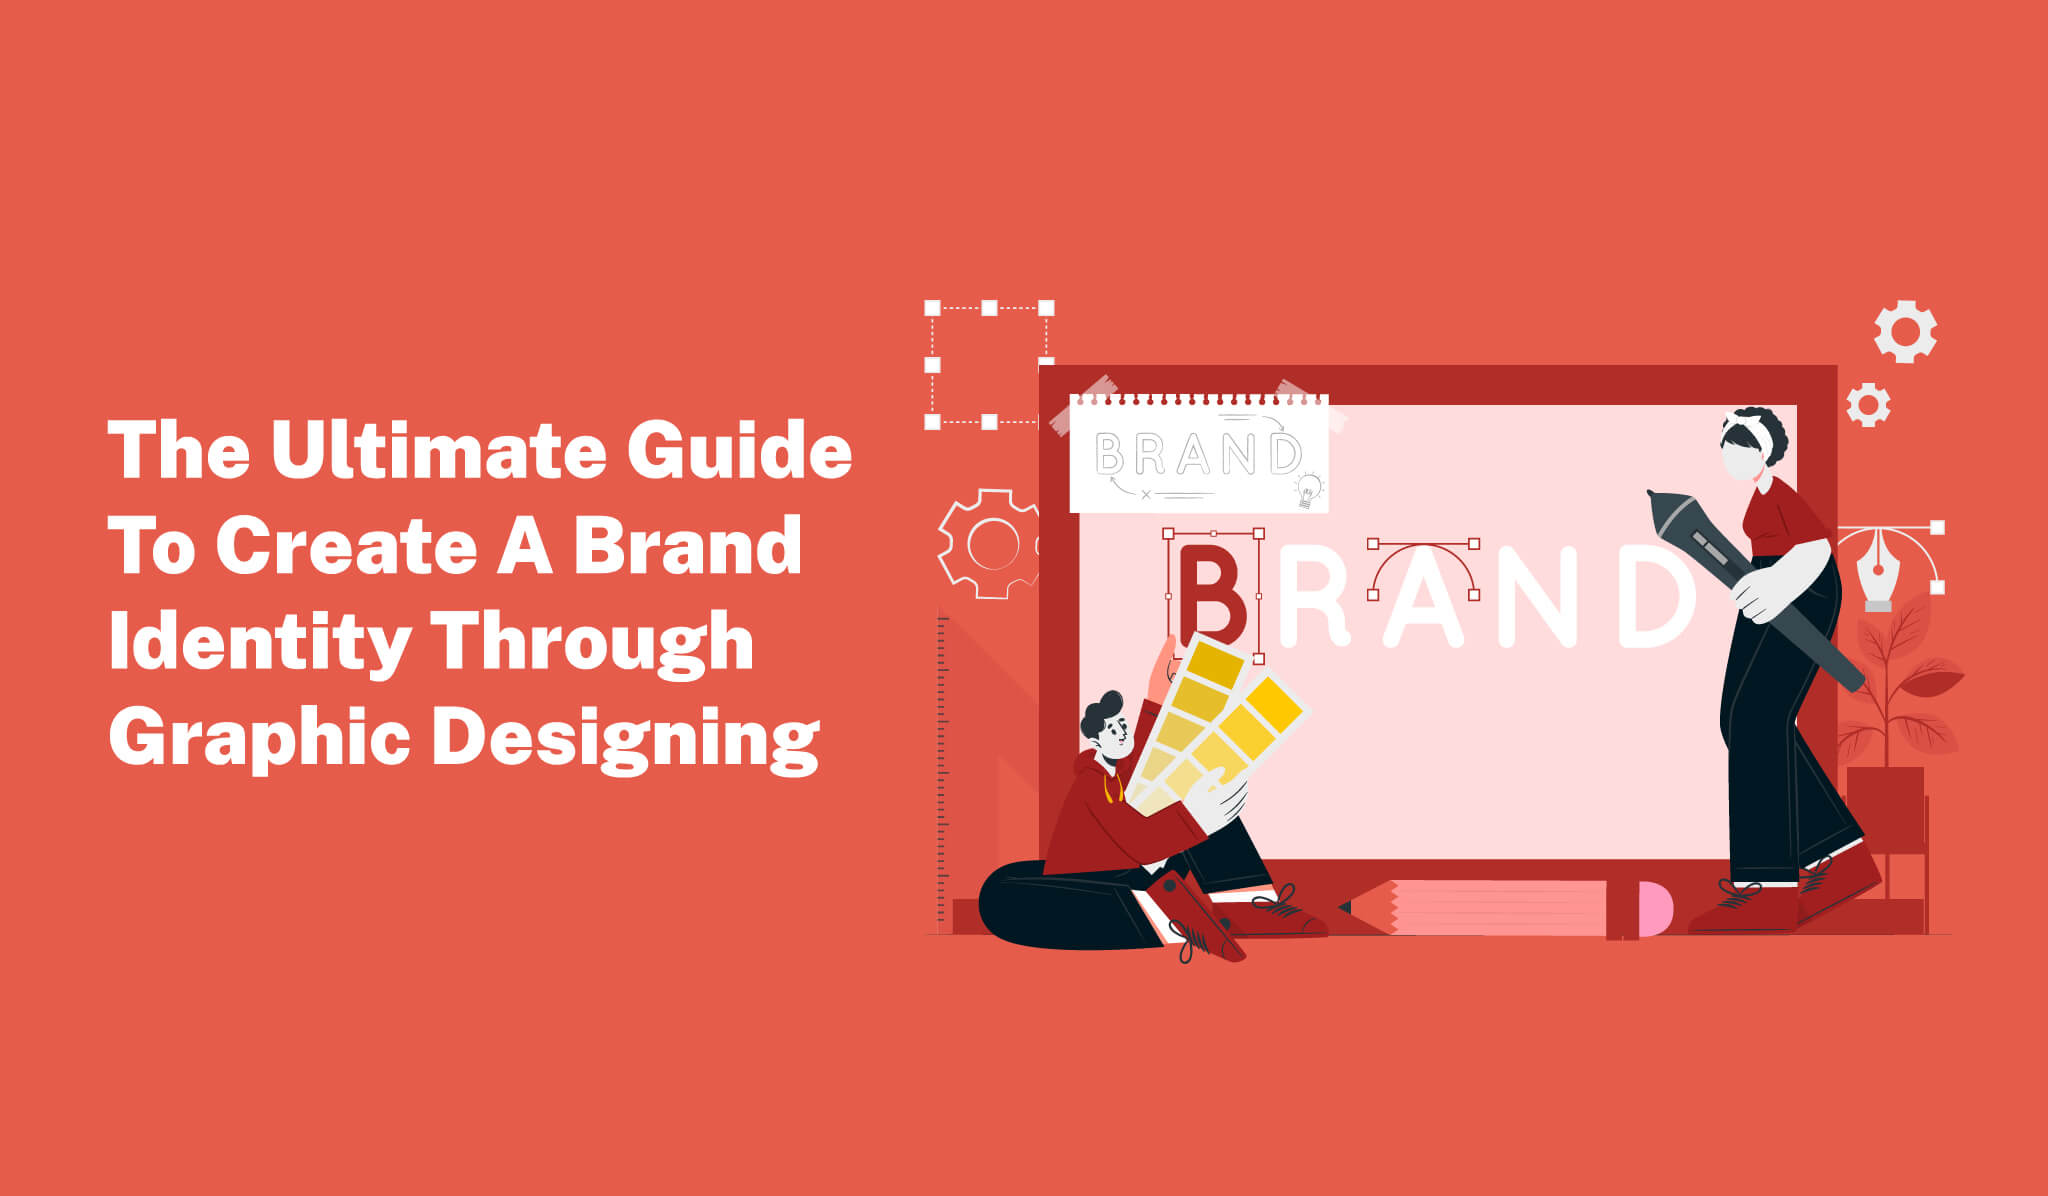 The Ultimate Guide To Create A Brand Identity Through Graphic Designing - Post it